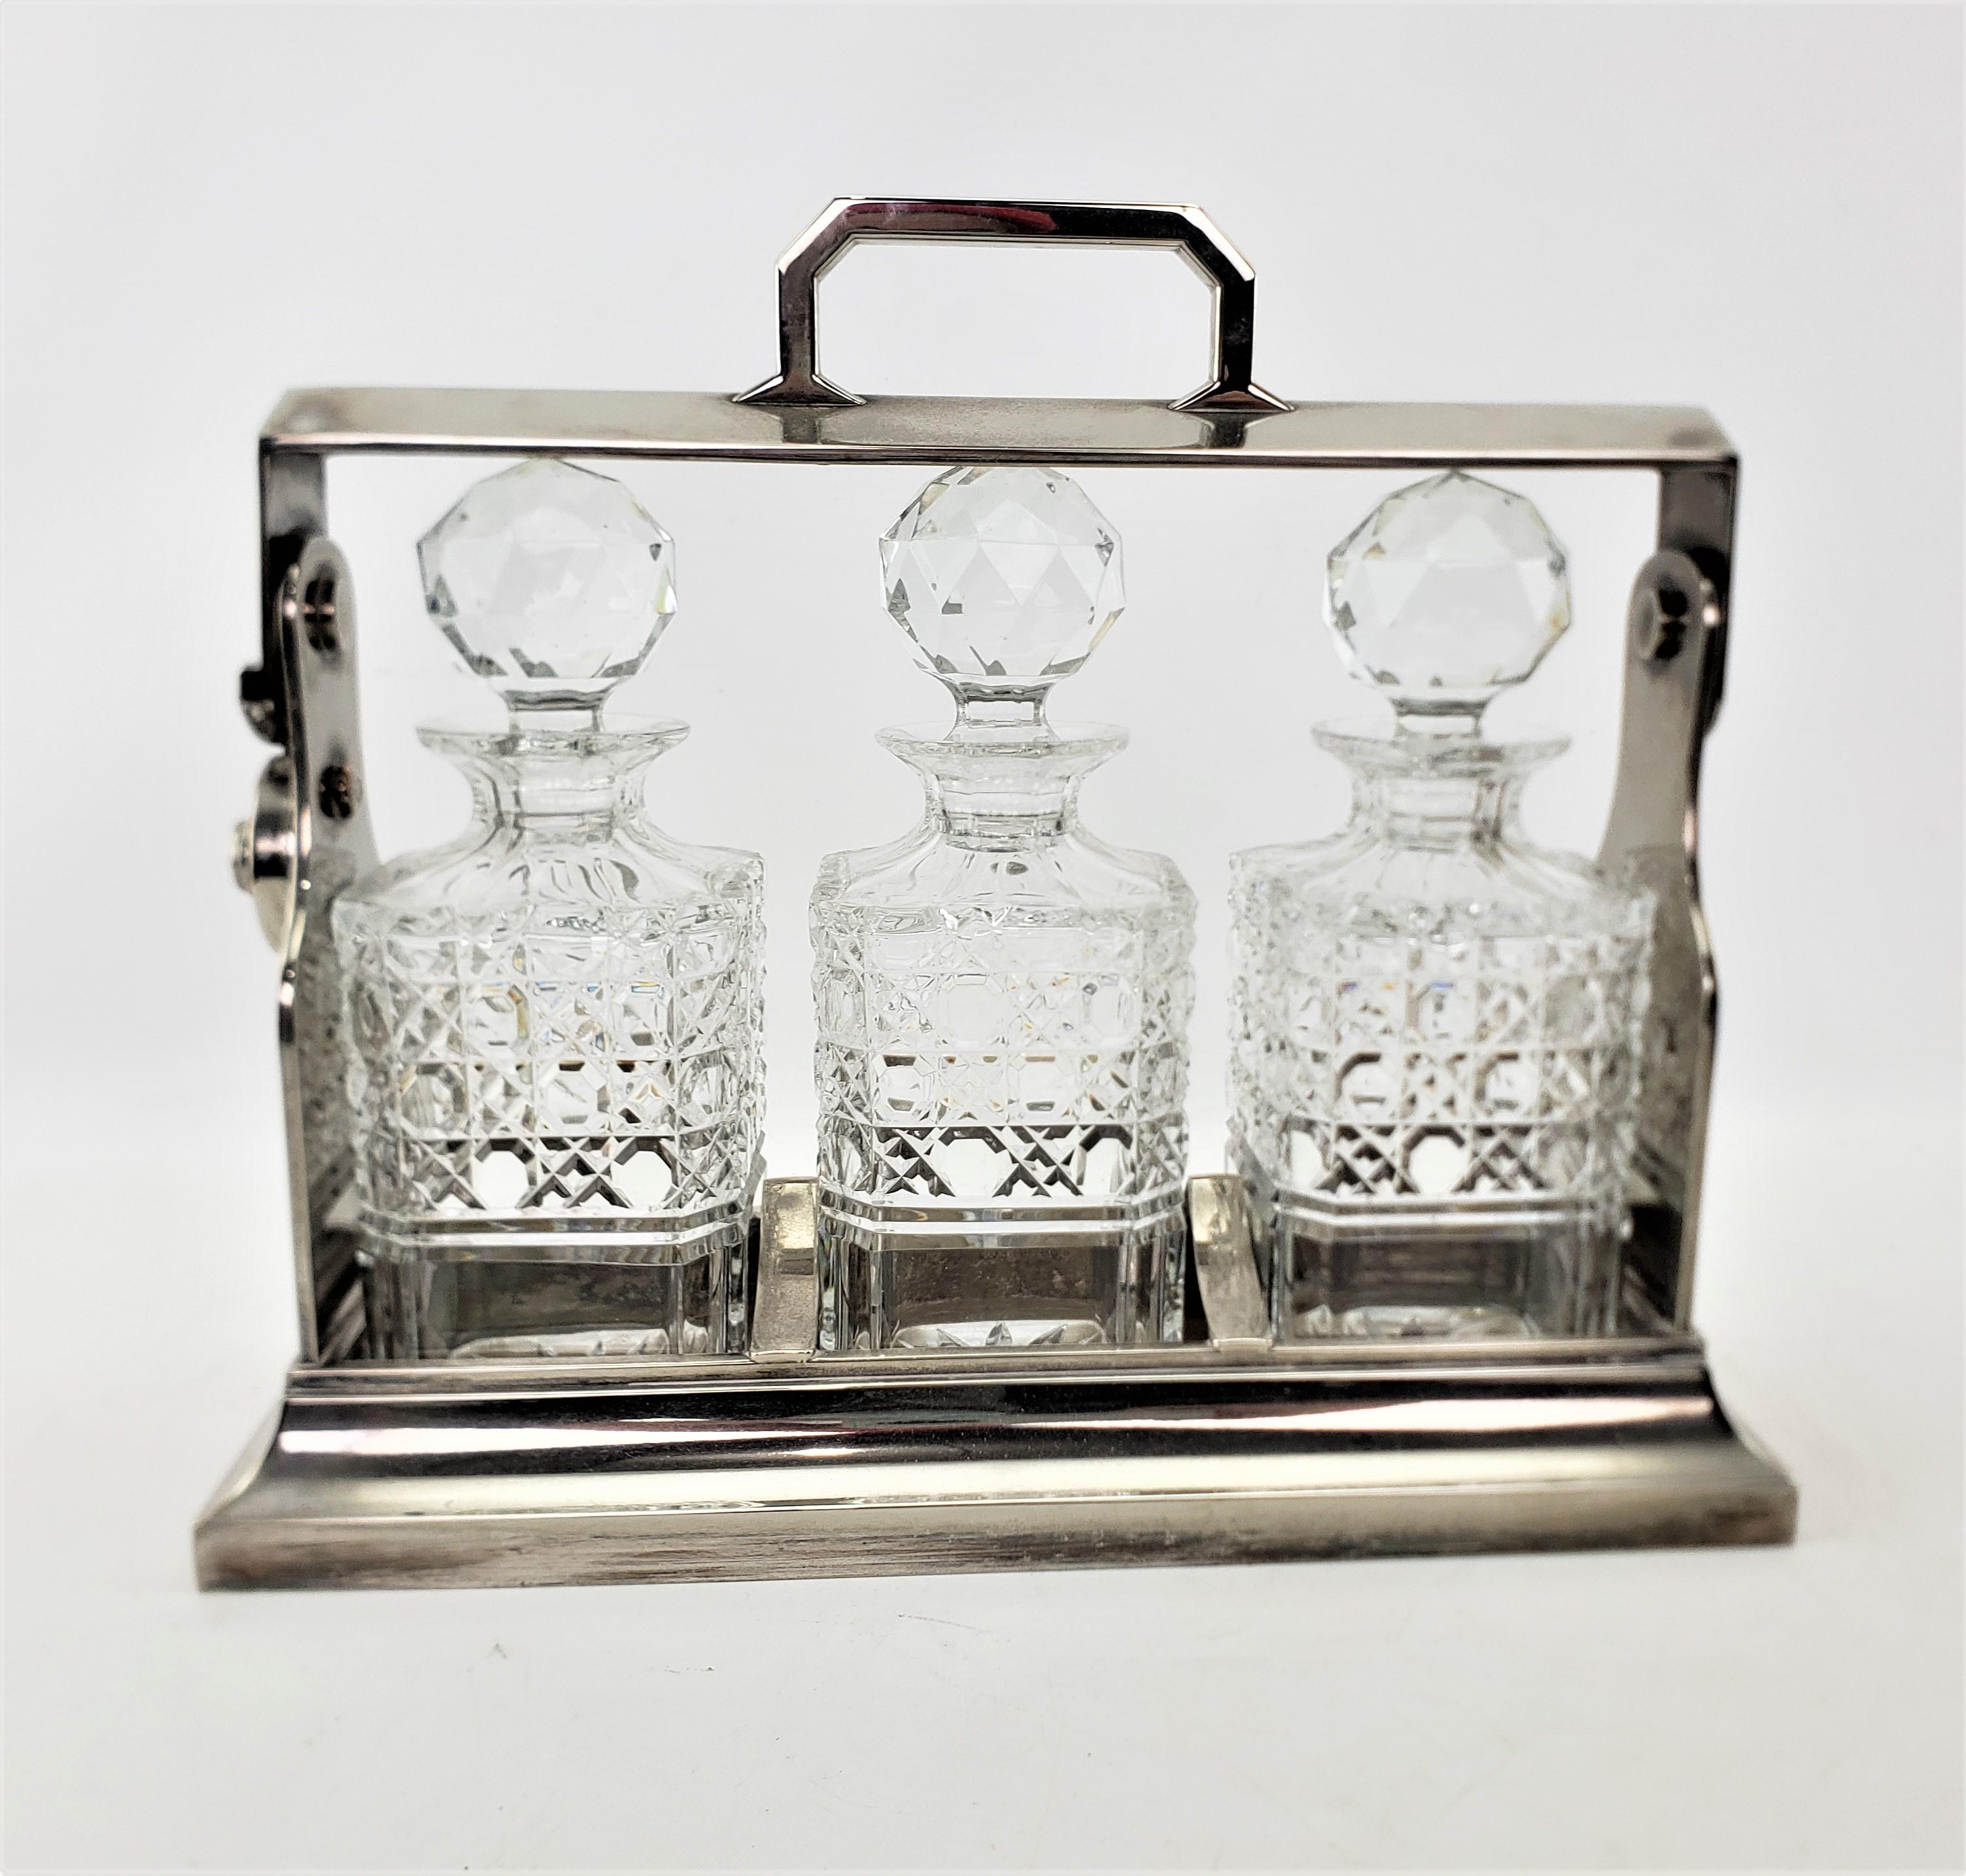 20th Century Antique Edwardian English Silver Plated & Cut Crystal 3 Bottle Tantalus and Key